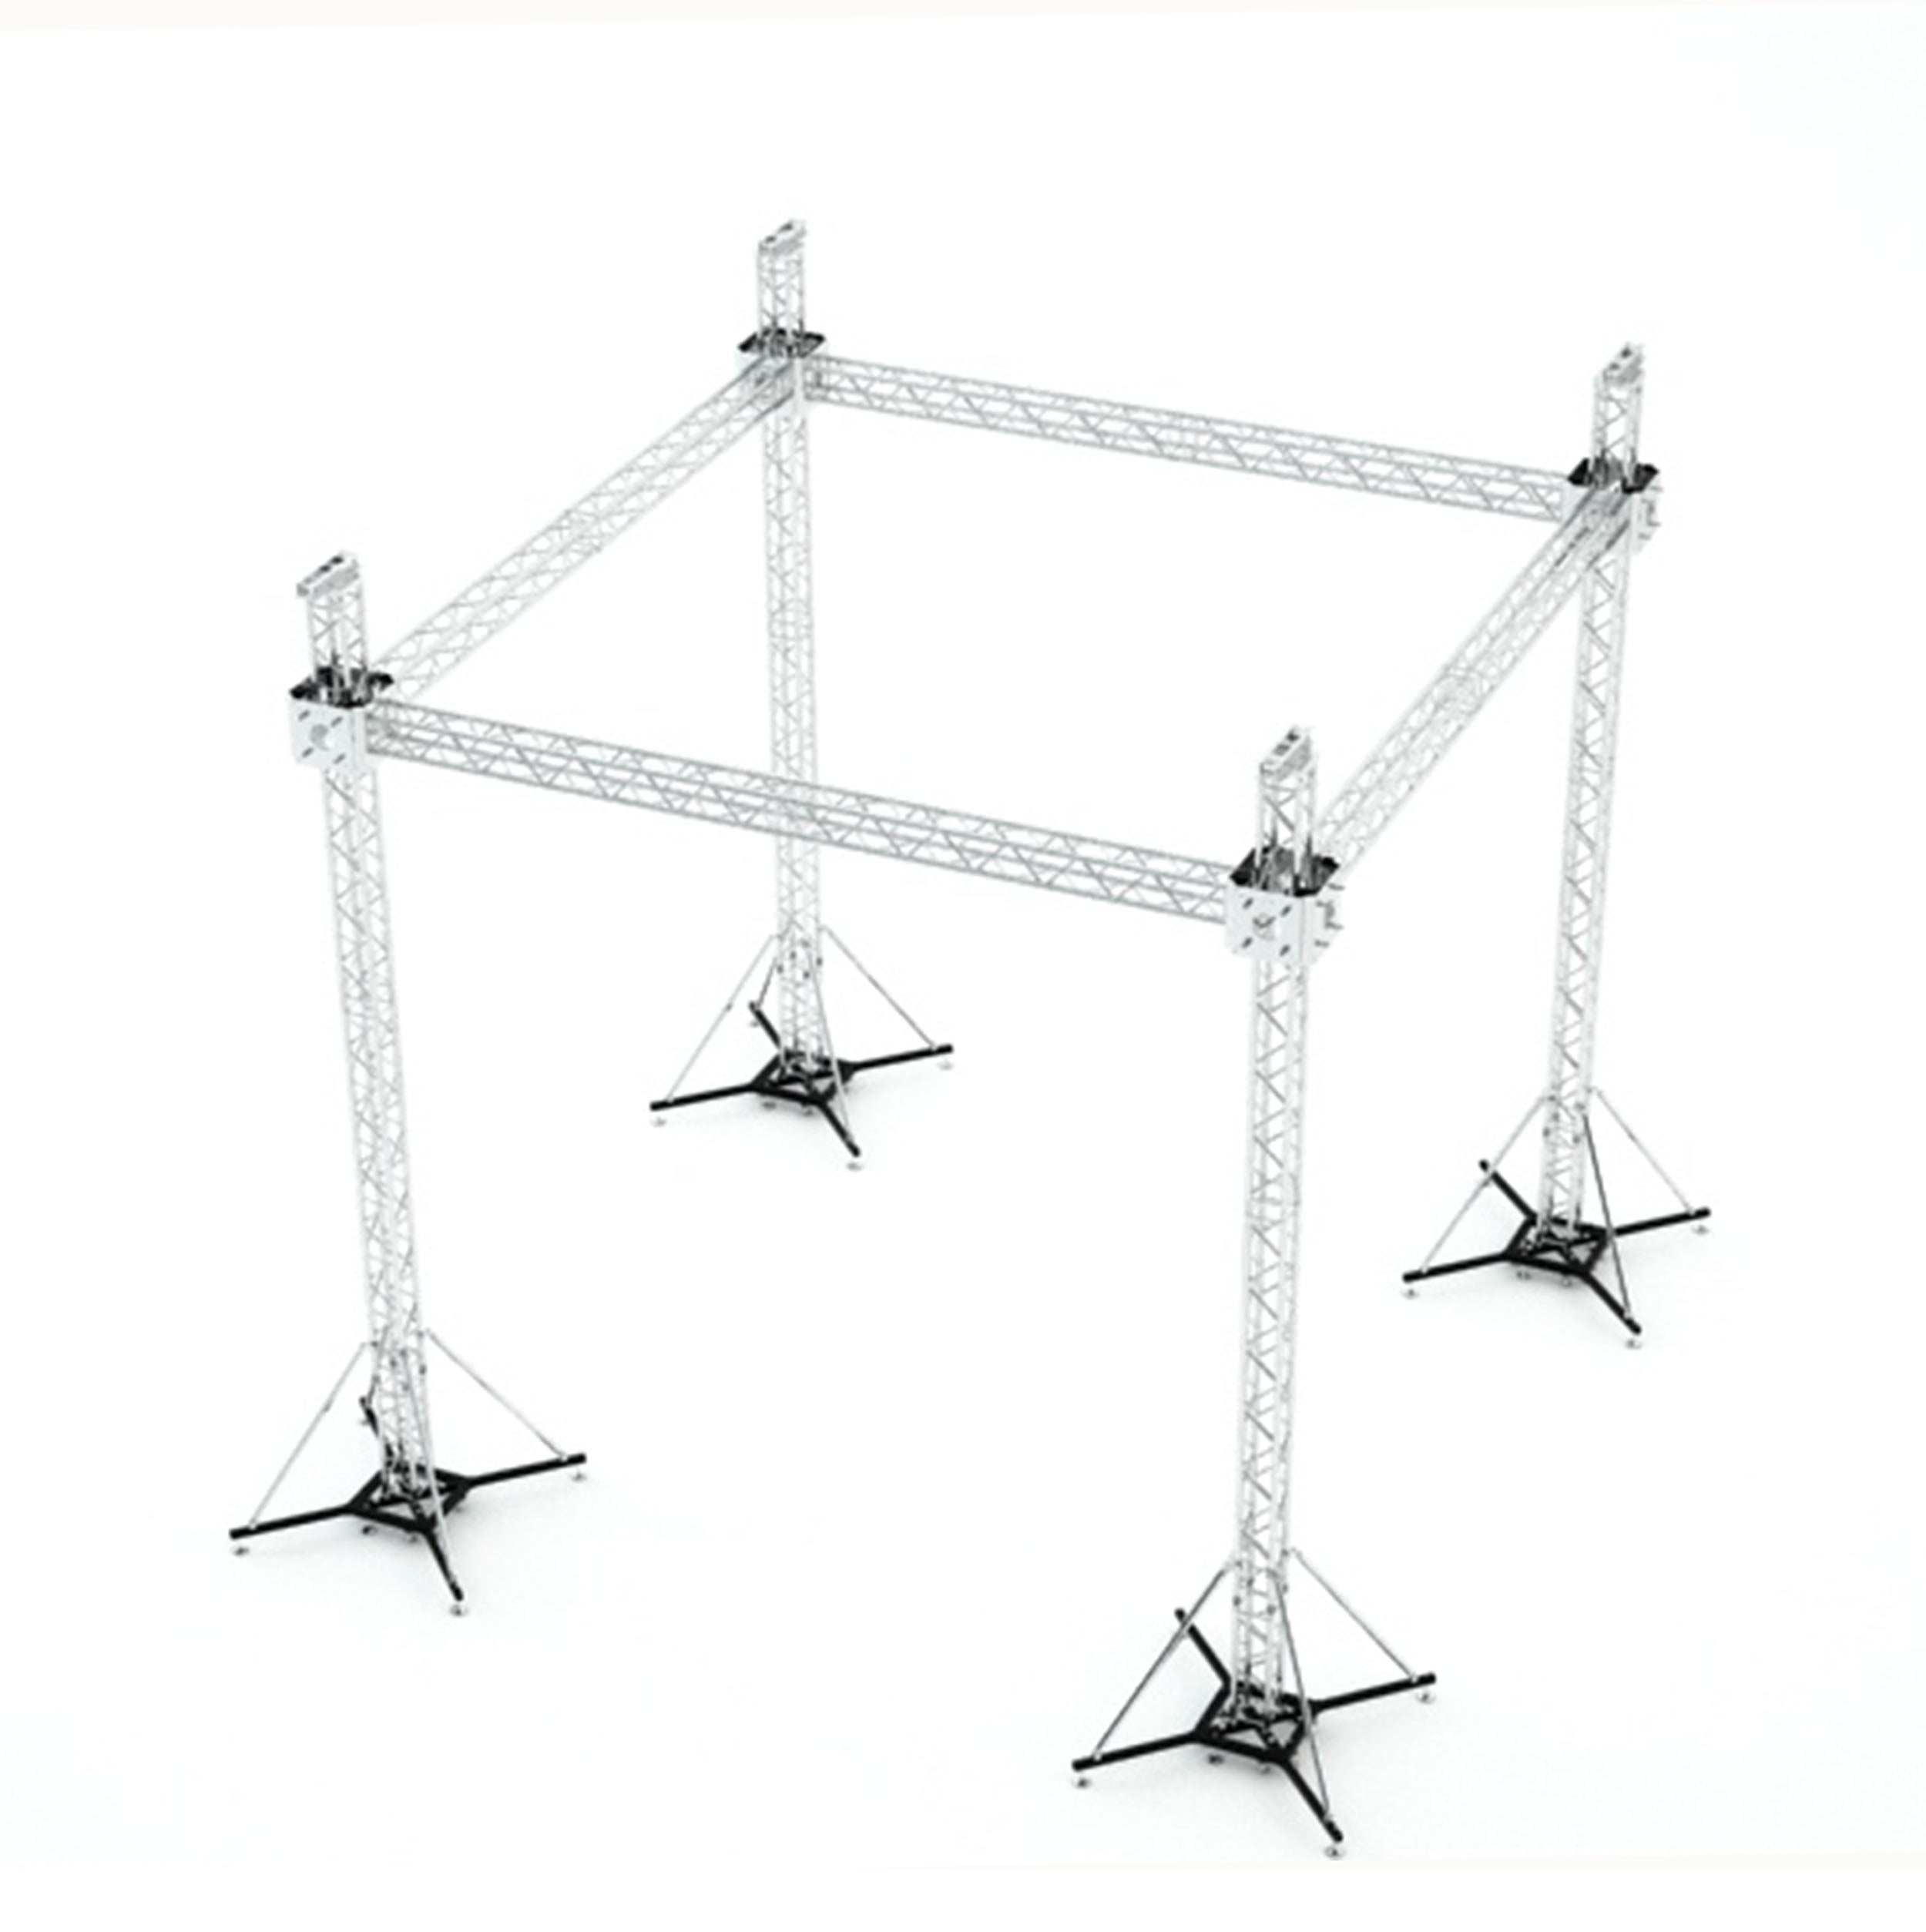 Pro X F34 Stage Roofing Truss System with Ground Support and Chain Hoists – 20x20x23 Ft. XTP-GS202023